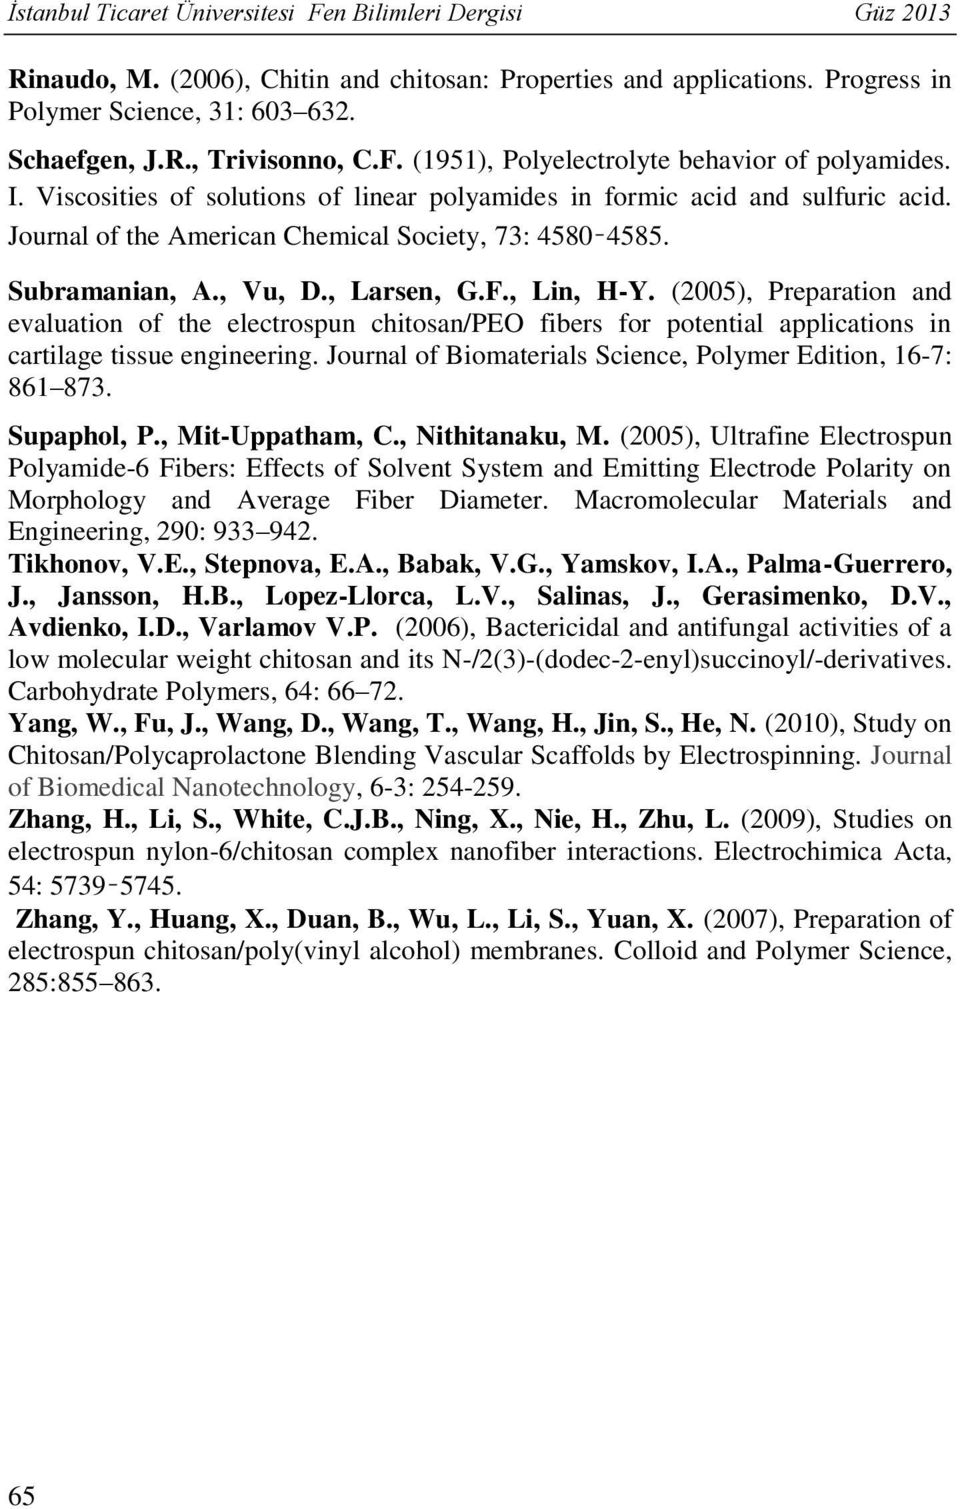 Subramanian, A., Vu, D., Larsen, G.F., Lin, H-Y. (2005), Preparation and evaluation of the electrospun chitosan/peo fibers for potential applications in cartilage tissue engineering.